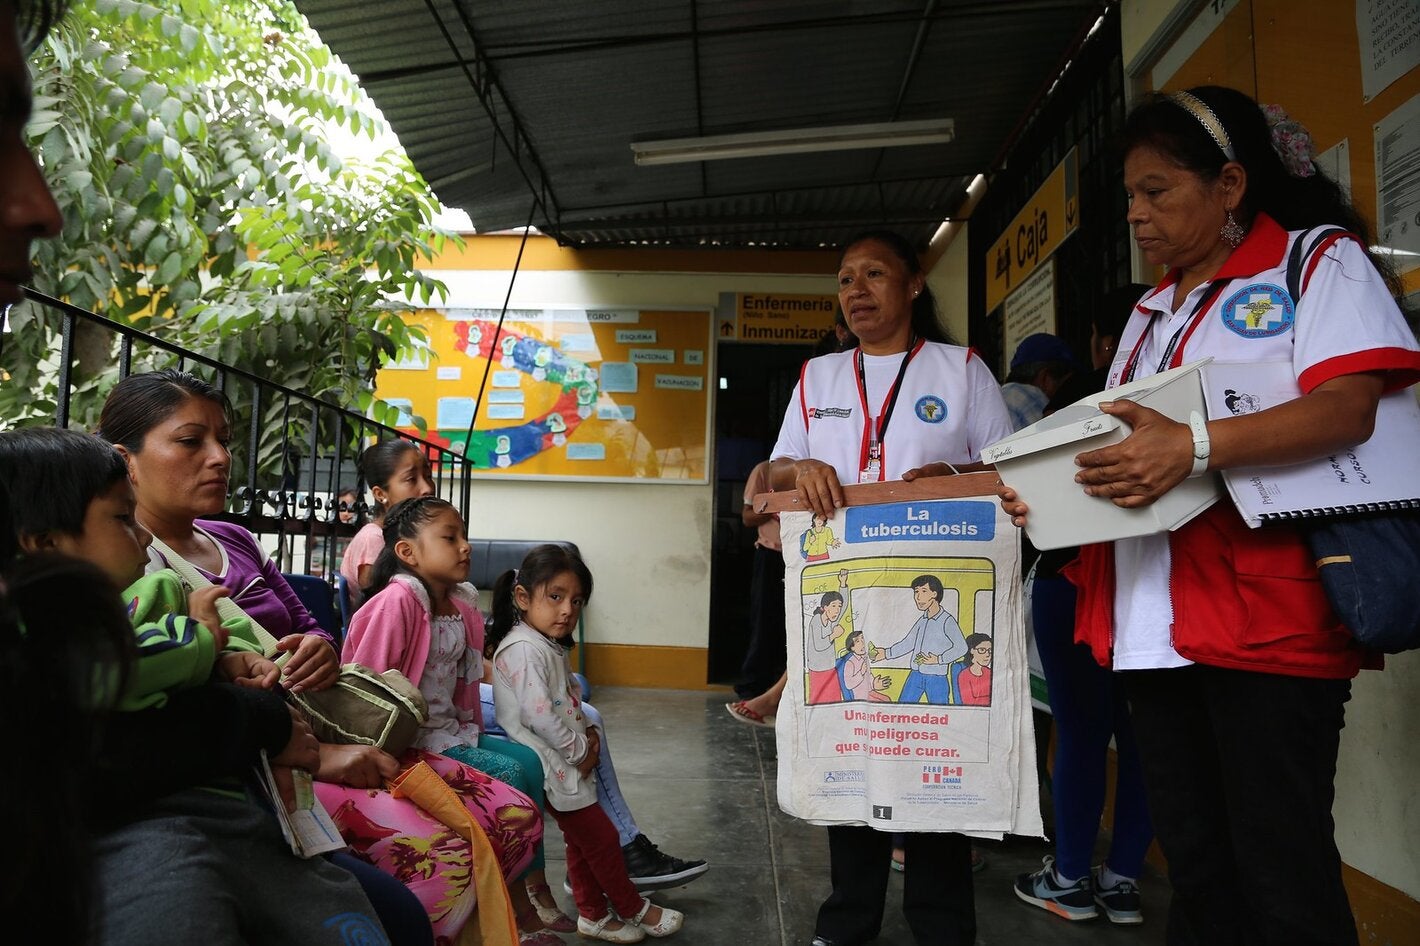 Educating the community about tuberculosis